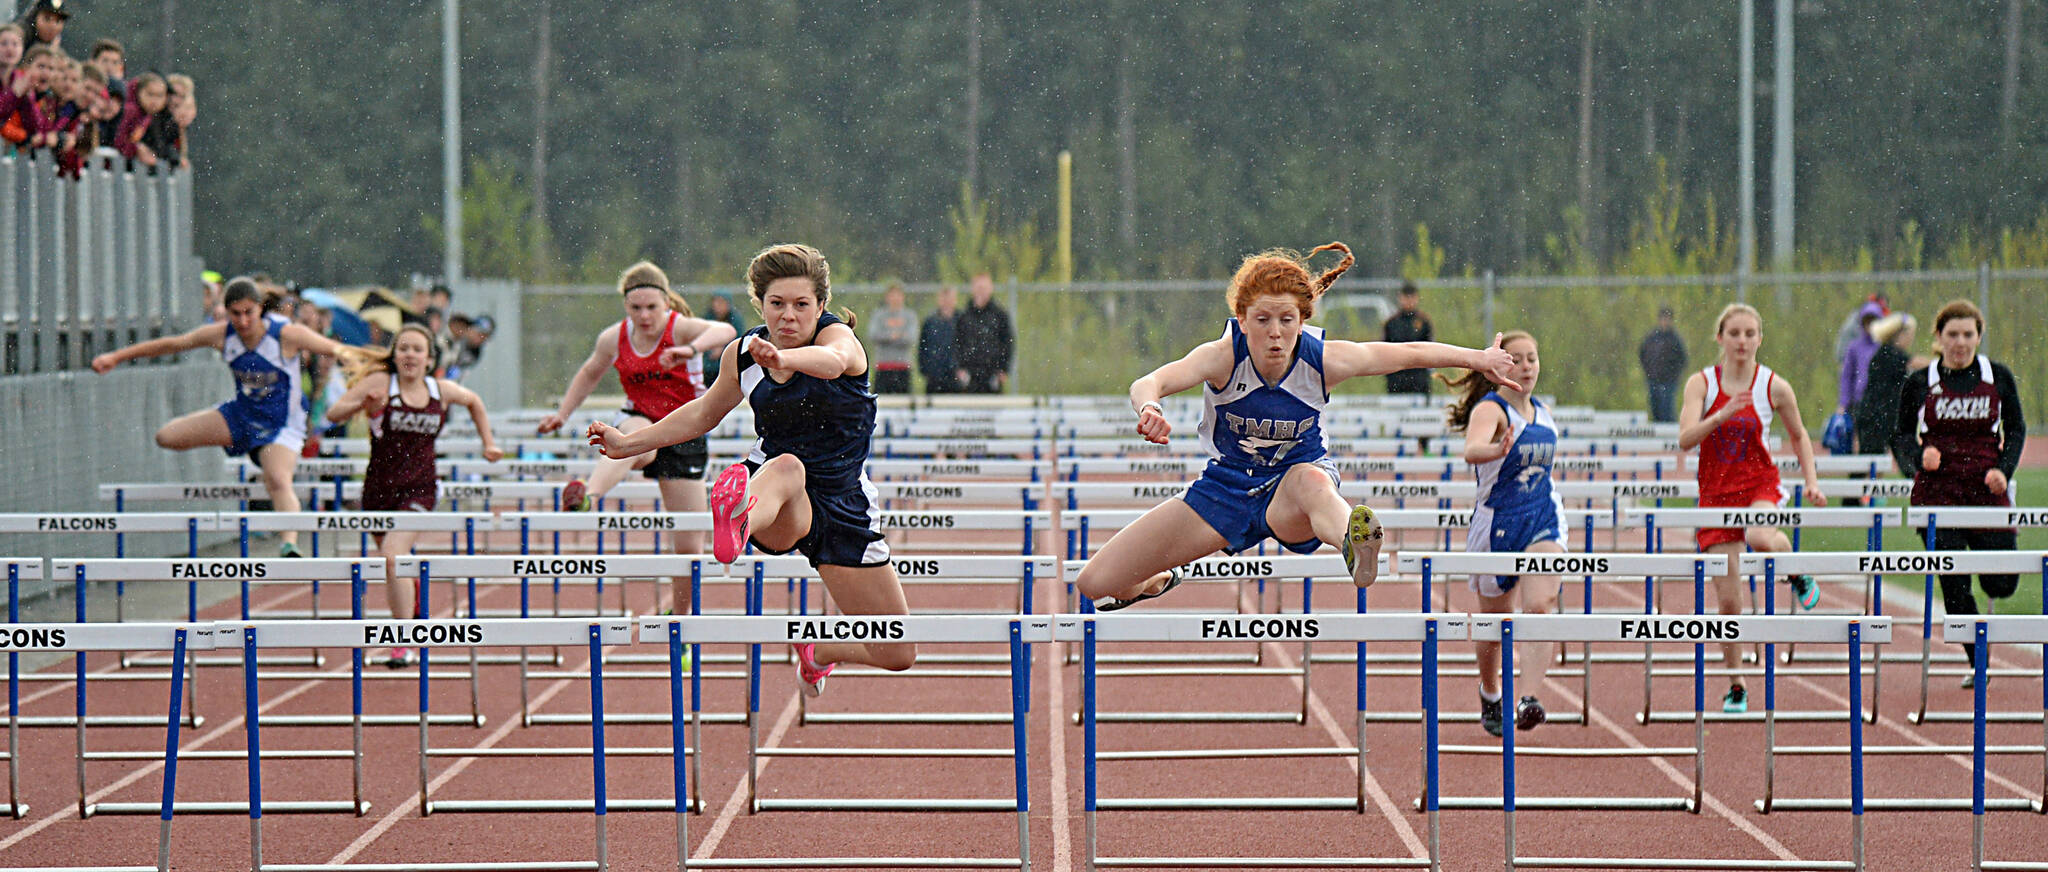 Petersburg High School sophomore Izabelle Ith, left, and Thunder Mountain junior Naomi Welling lead the field in the girls 100-meter hurdles finals at the 2015 Capital City Invitational. (Klas Stolpe / Juneau Empire)